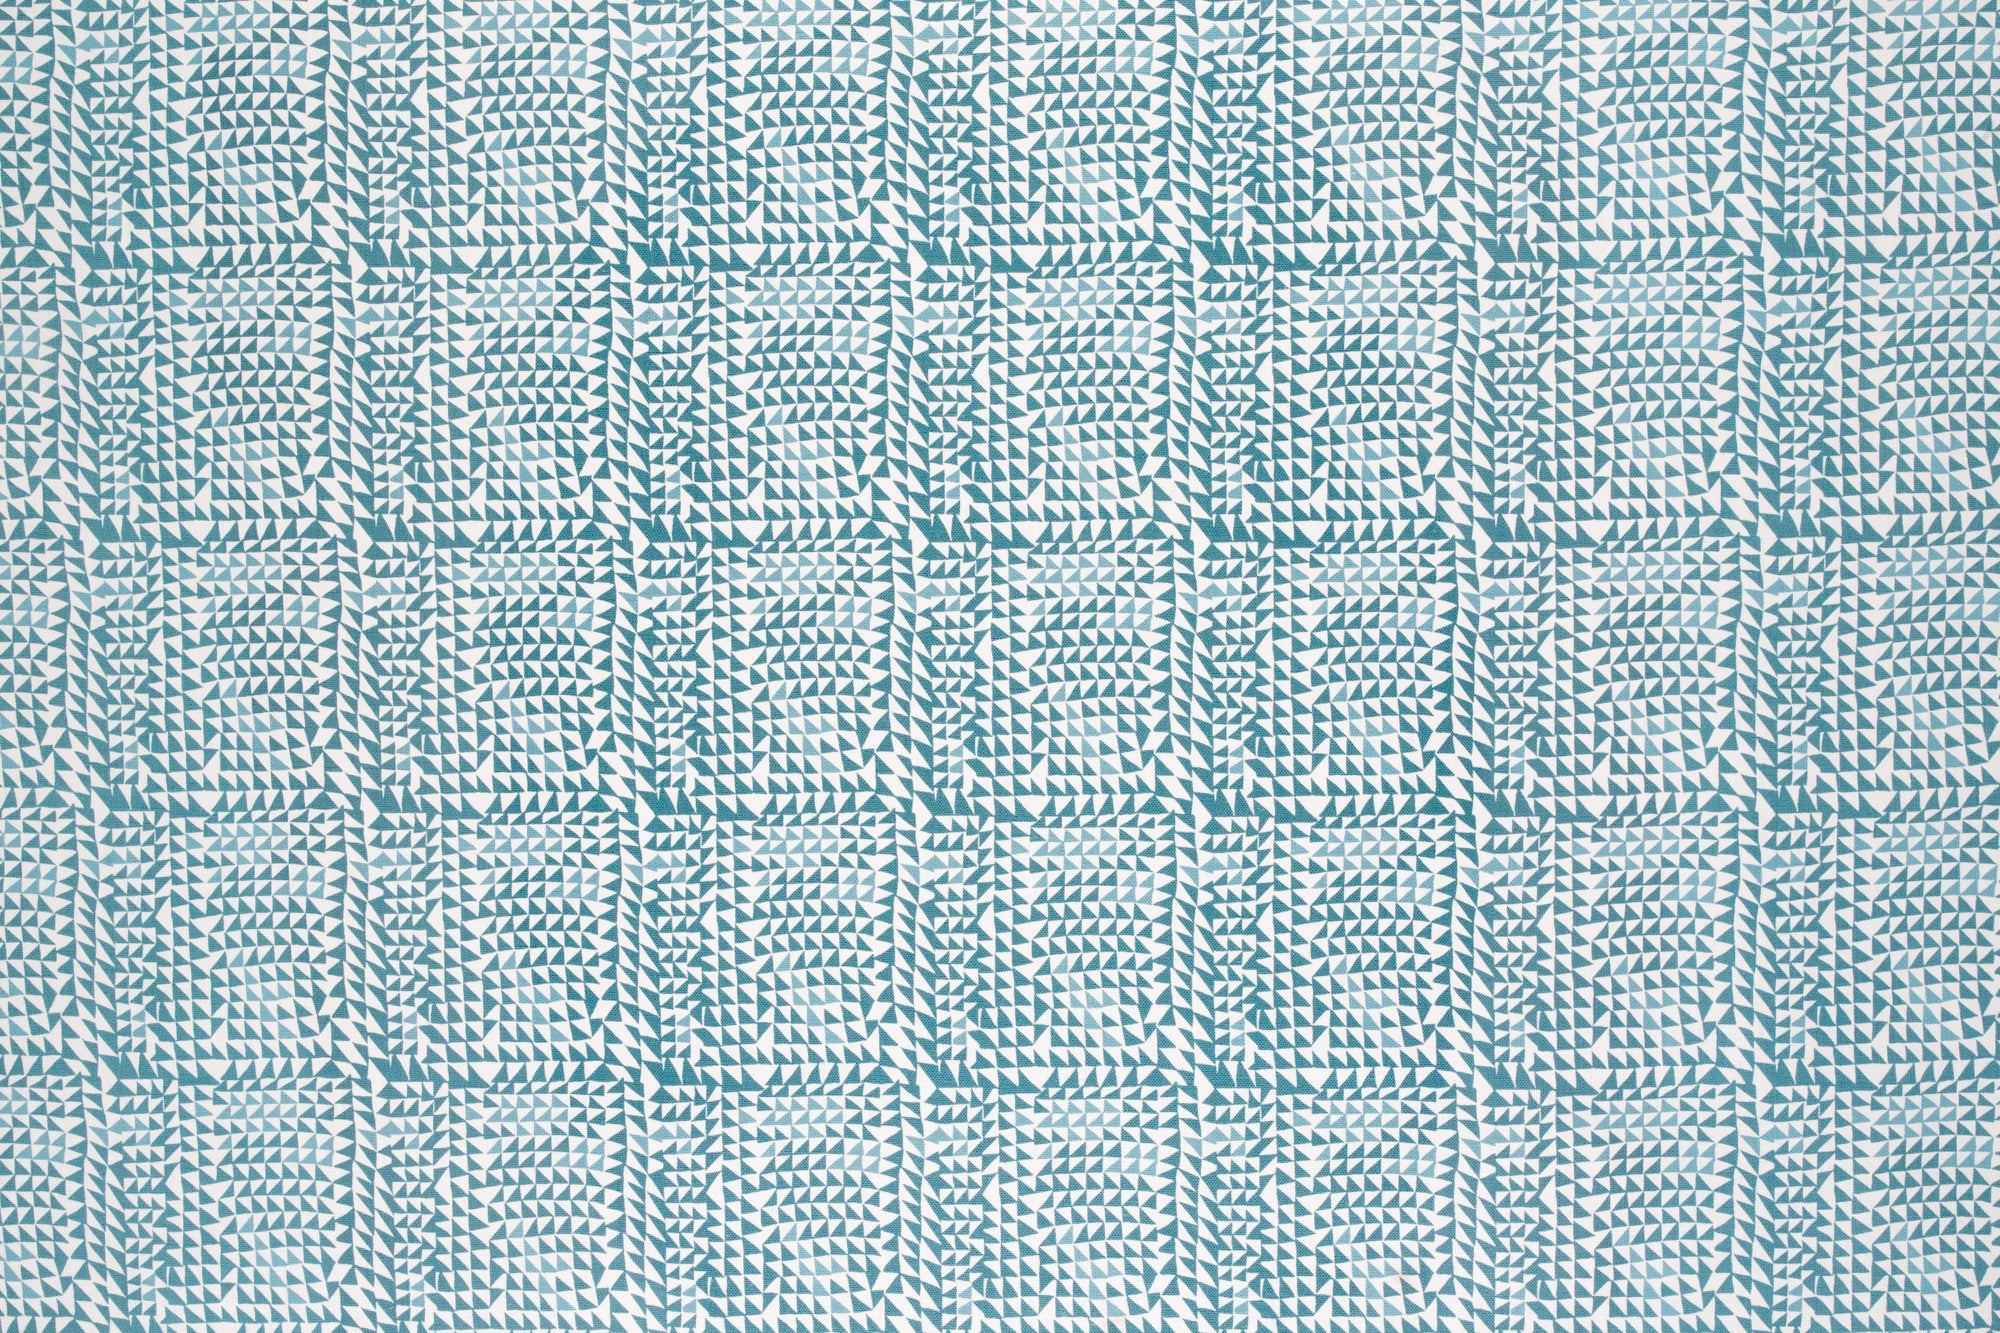 Detail of fabric in a dense triangle grid print in shades of blue on a white field.